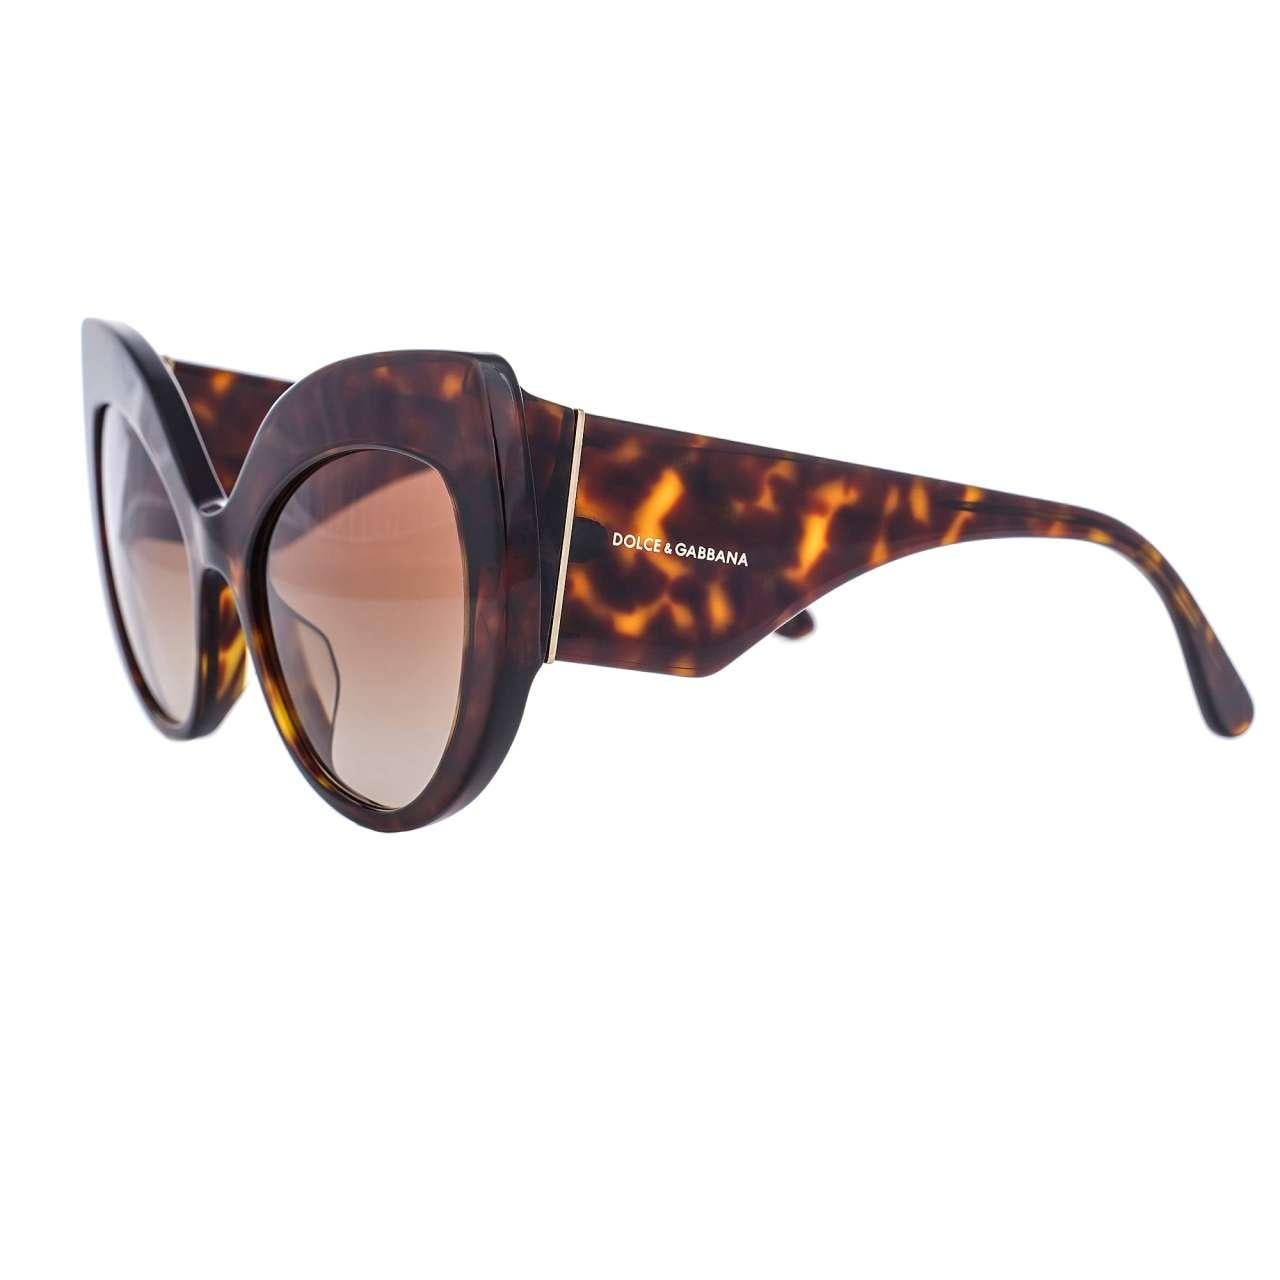 - Cat Eye Sunglasses DG 4321 with leopard pattern DG logo in gold and brown by DOLCE & GABBANA - MADE IN ITALY - New with Case - Model: DG 4321 - Color Frame: Brown / Gold - Color Lense: Faded brown - Material Frame: 100% Acetat - 100% UV protection